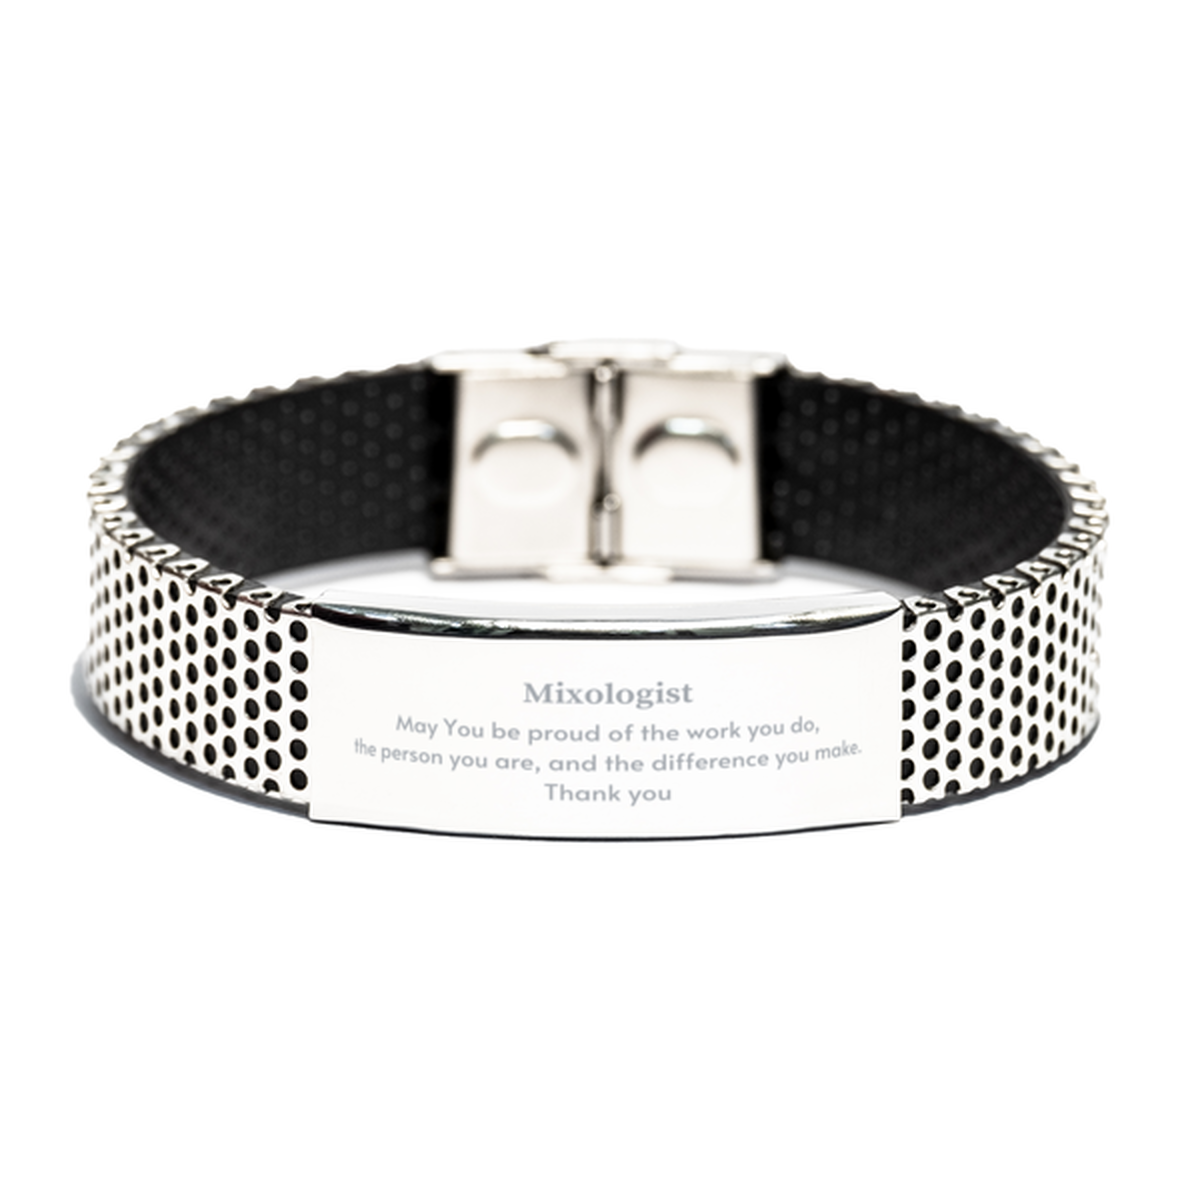 Heartwarming Stainless Steel Bracelet Retirement Coworkers Gifts for Mixologist, Mixologist May You be proud of the work you do, the person you are Gifts for Boss Men Women Friends